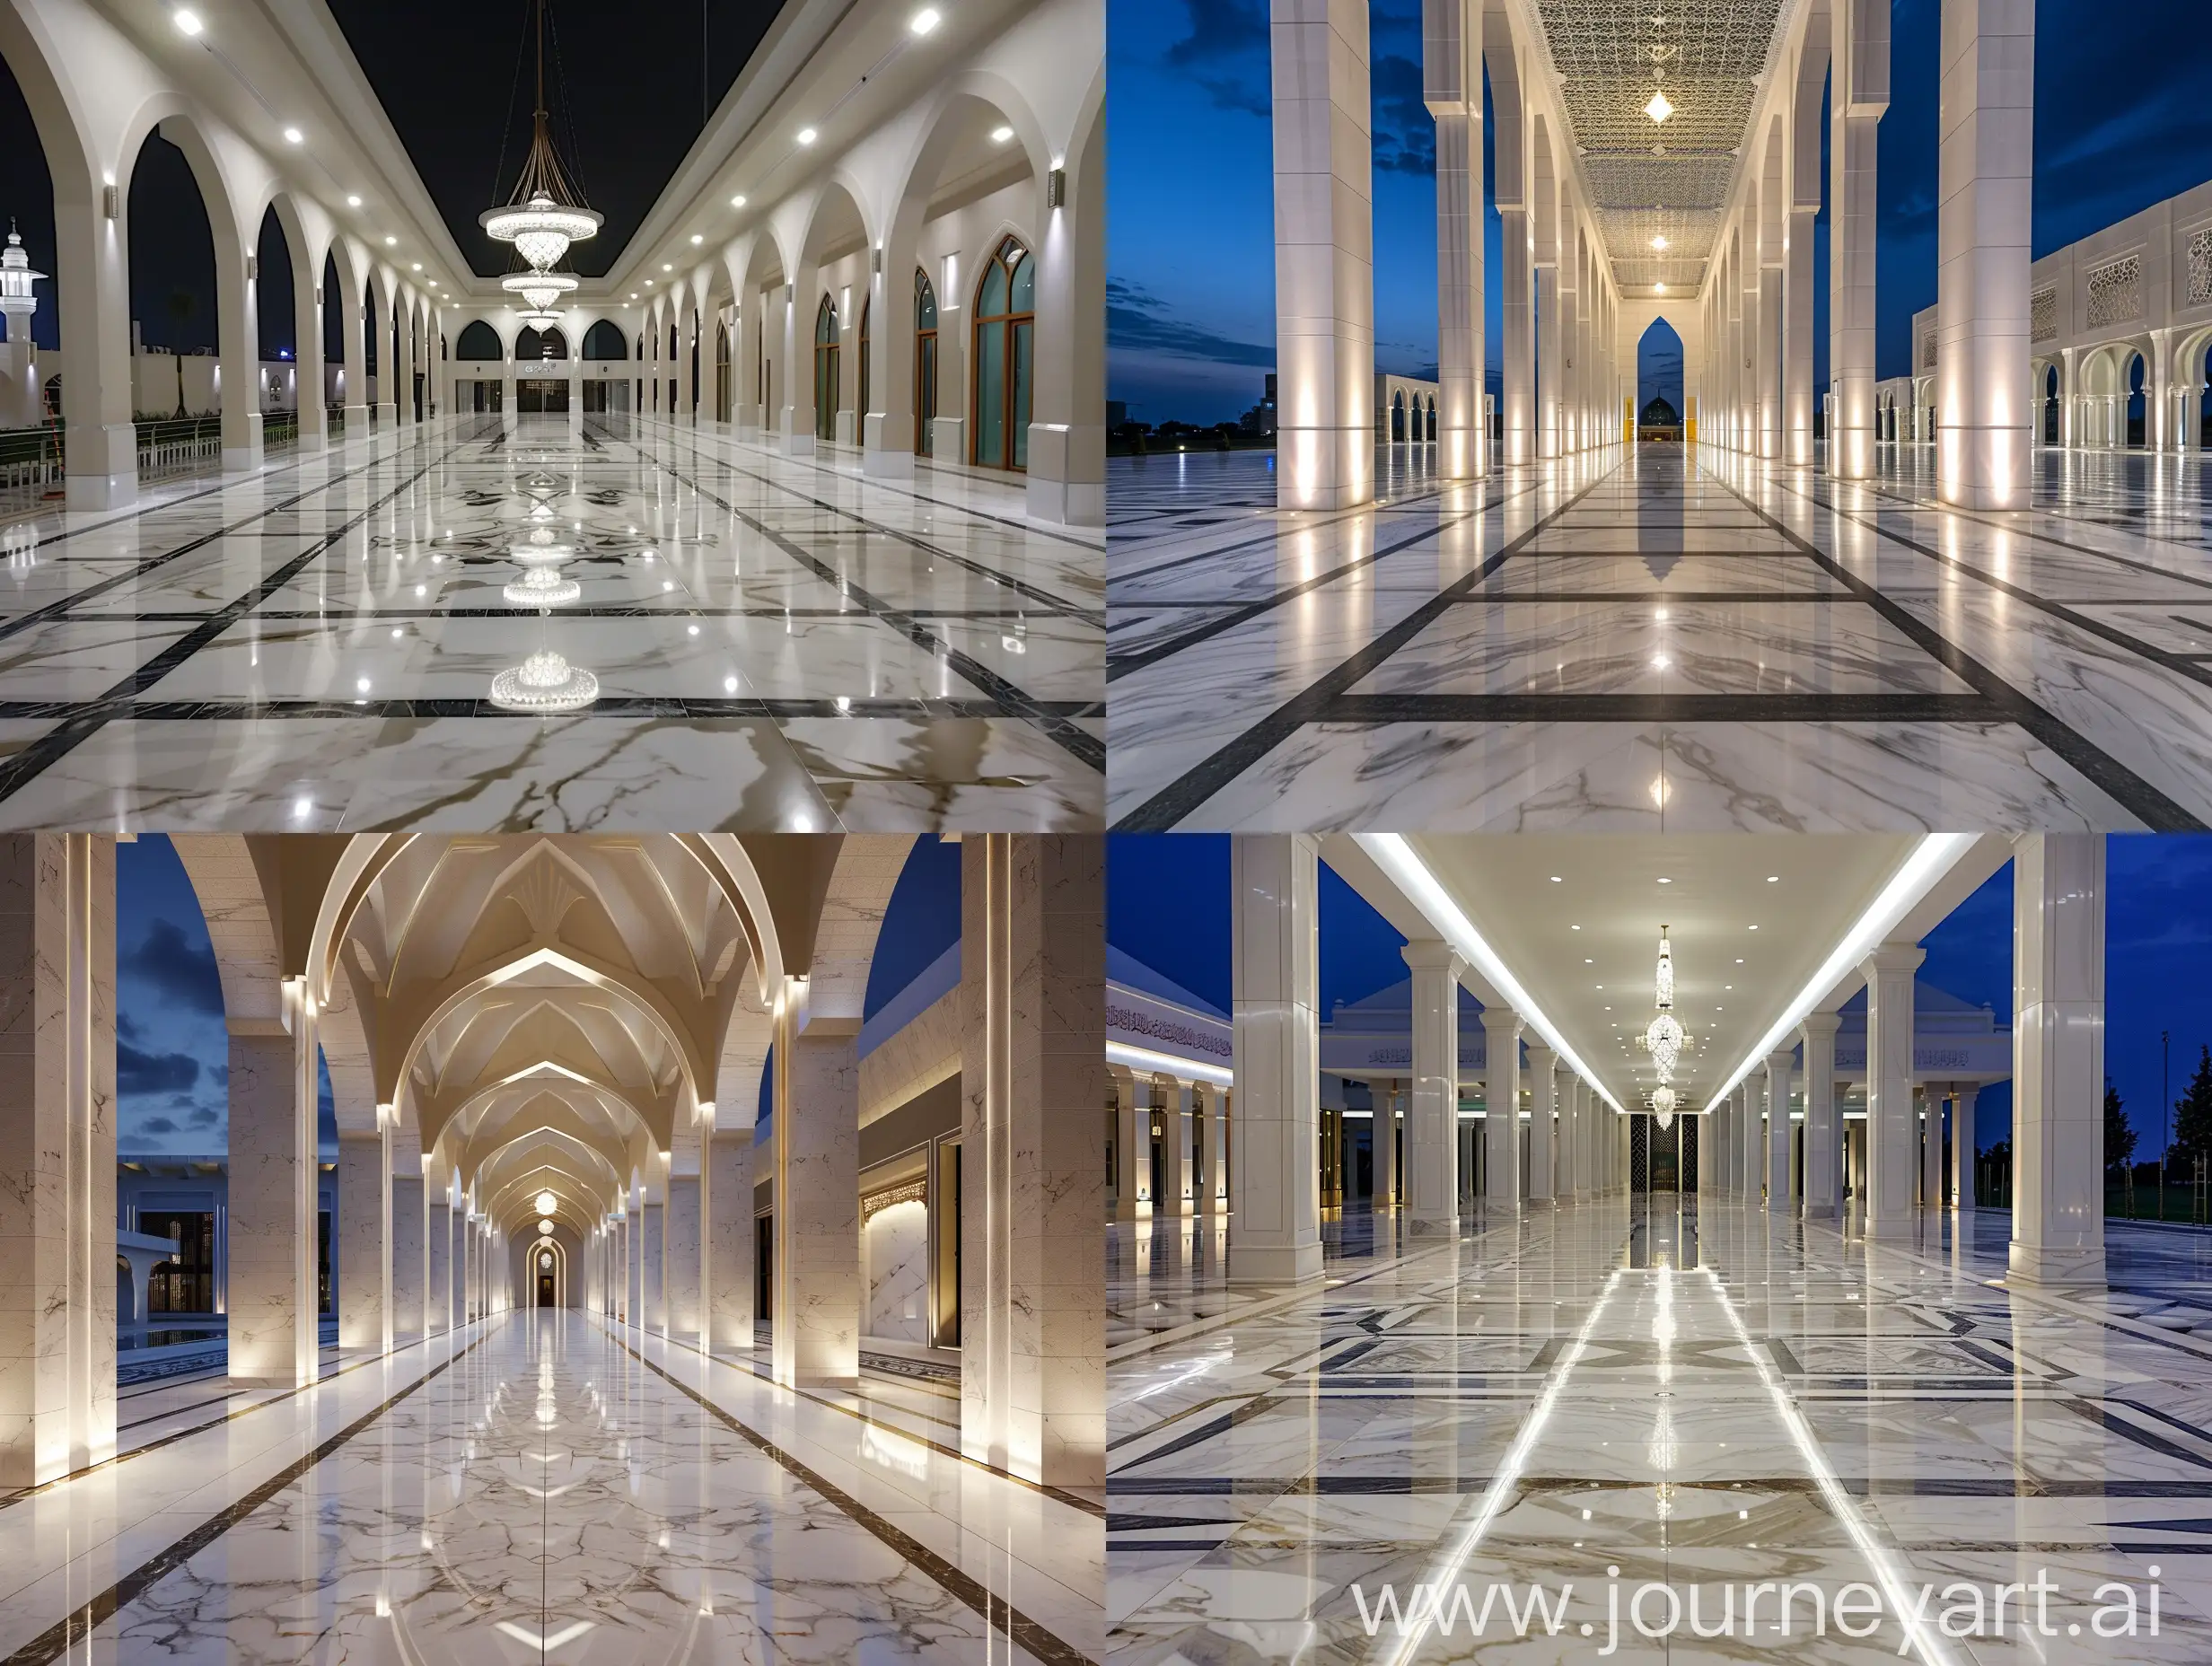 Modern-Mosque-Interior-with-Shining-Marble-Floors